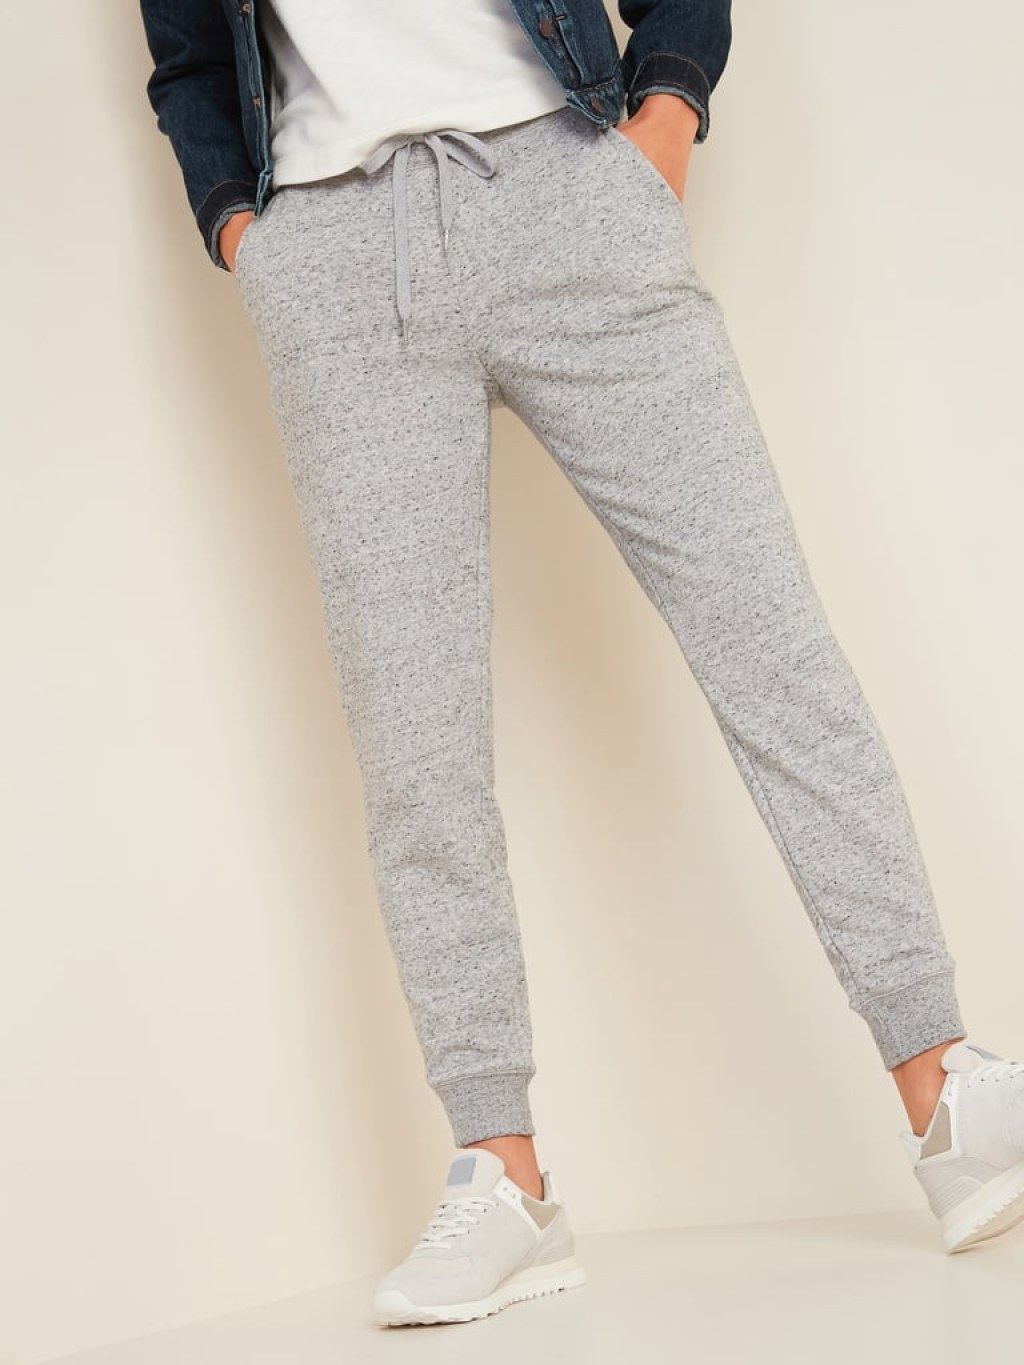 Picture of: How to Style Gray Sweatpants  POPSUGAR Fashion